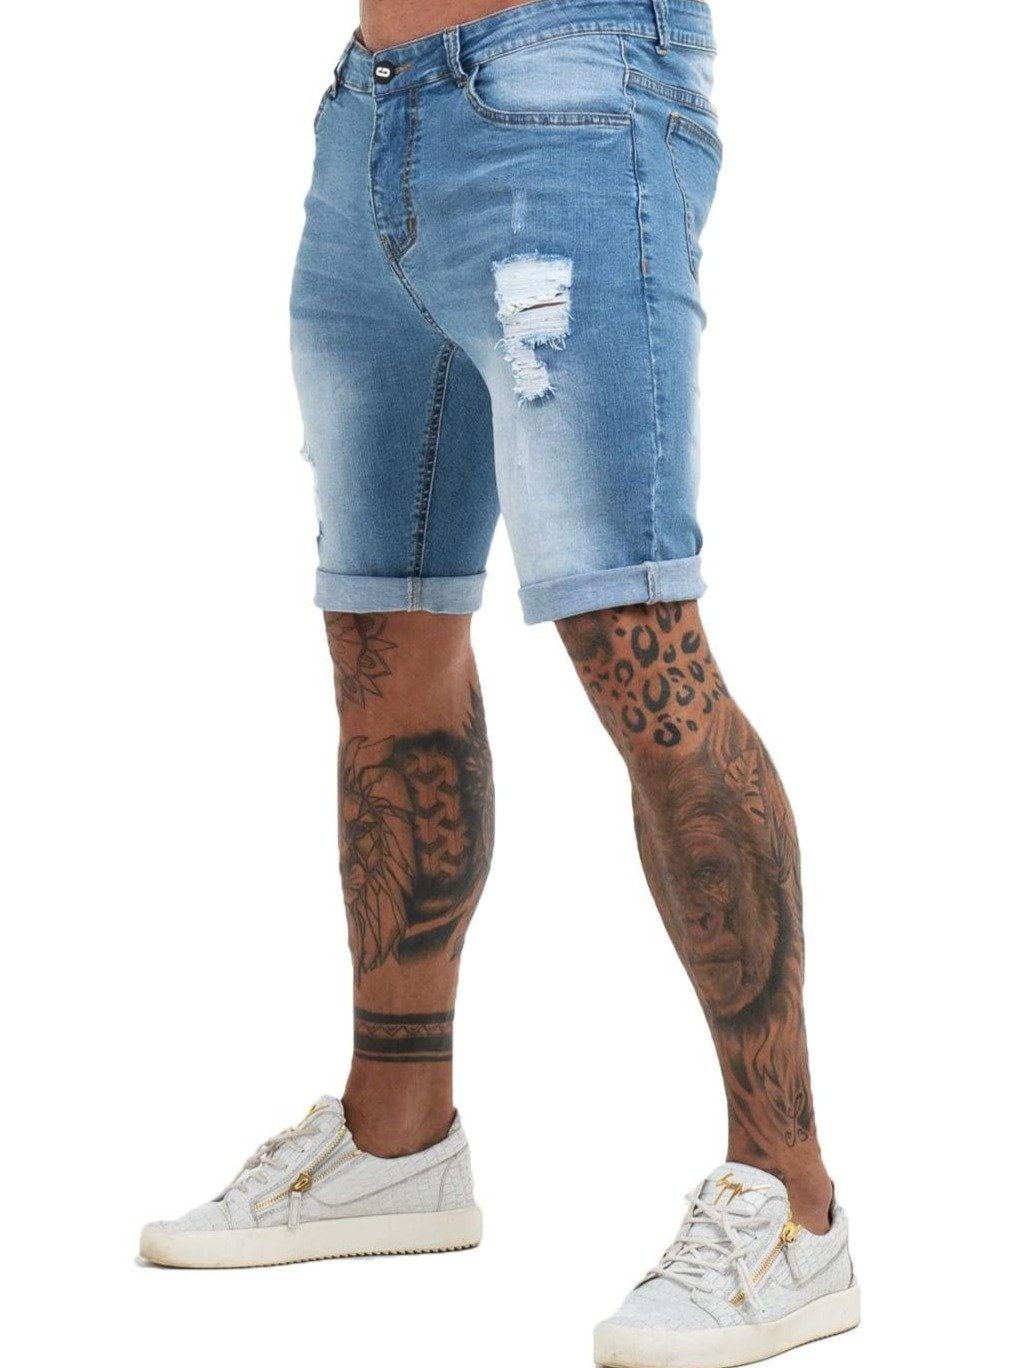 Light Blue Short Jeans Ripped